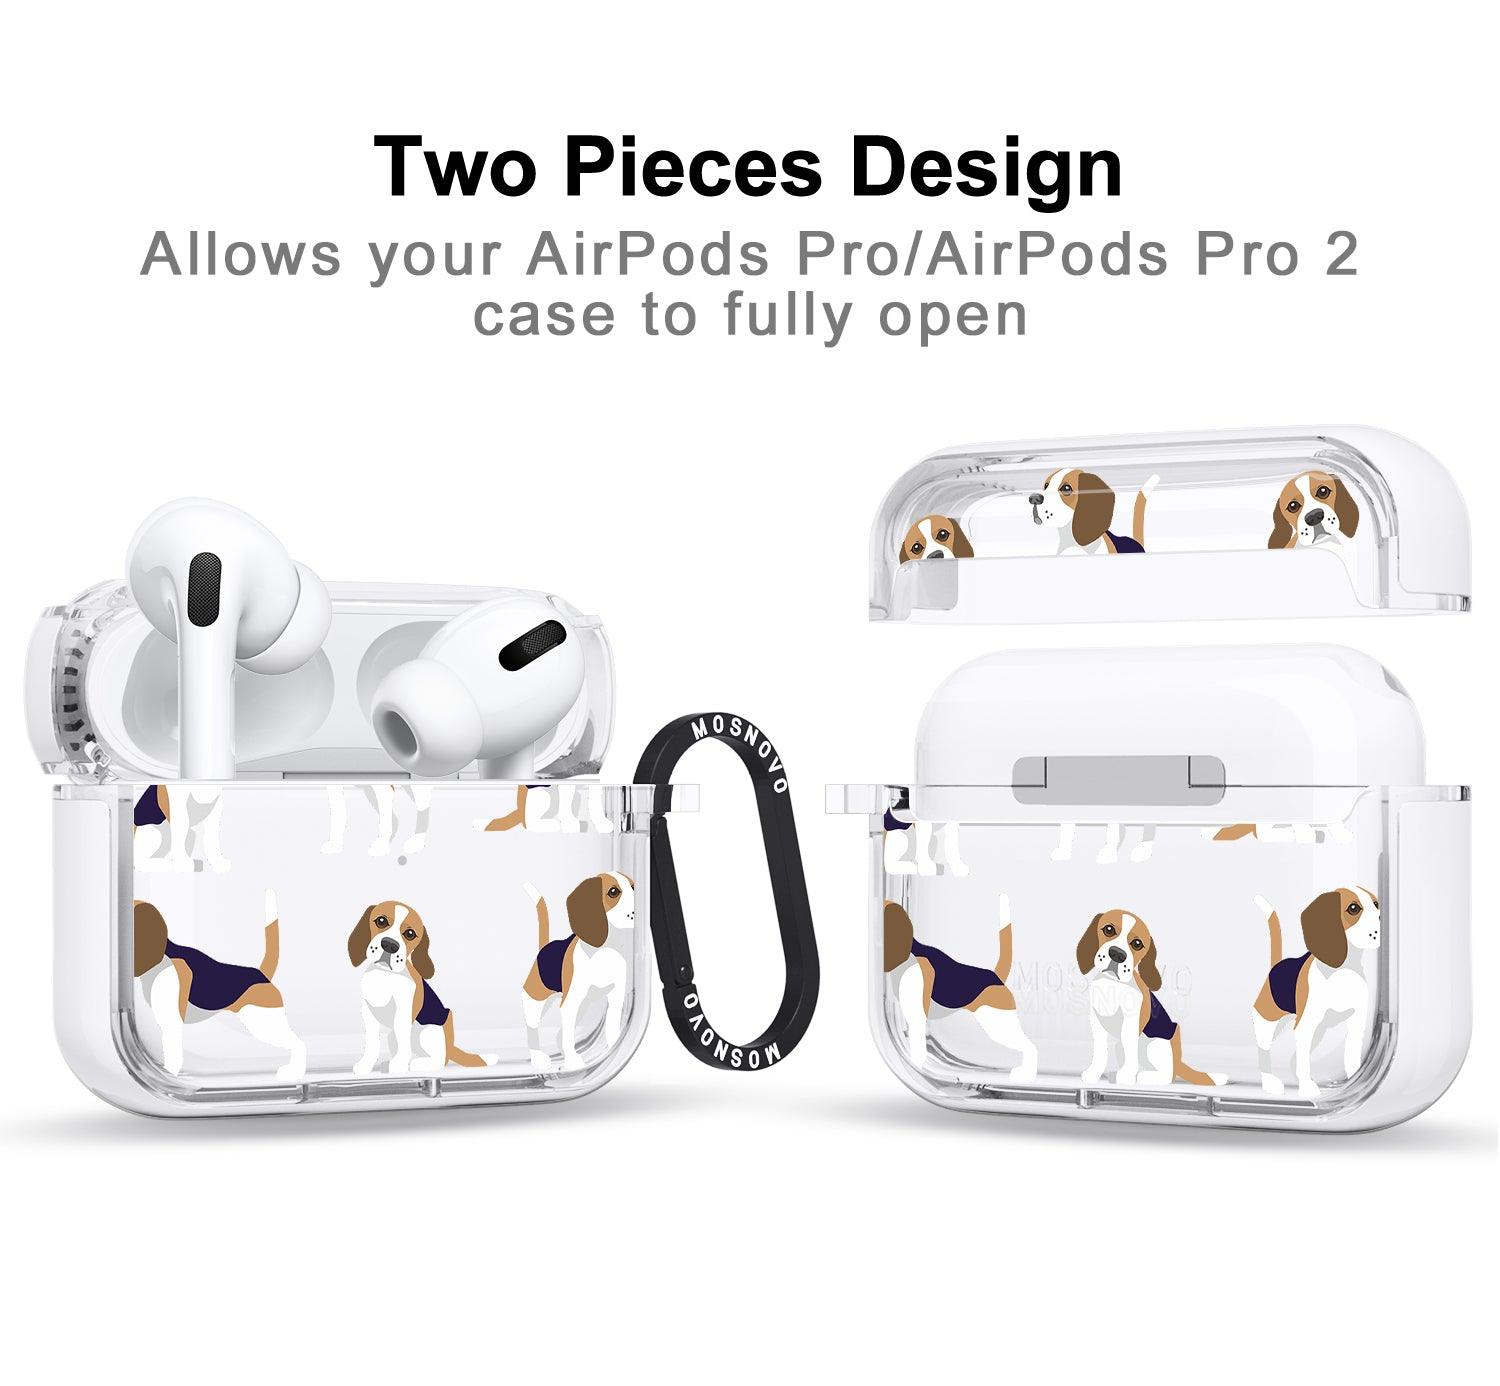 Cute Beagles AirPods Pro 2 Case (2nd Generation) - MOSNOVO